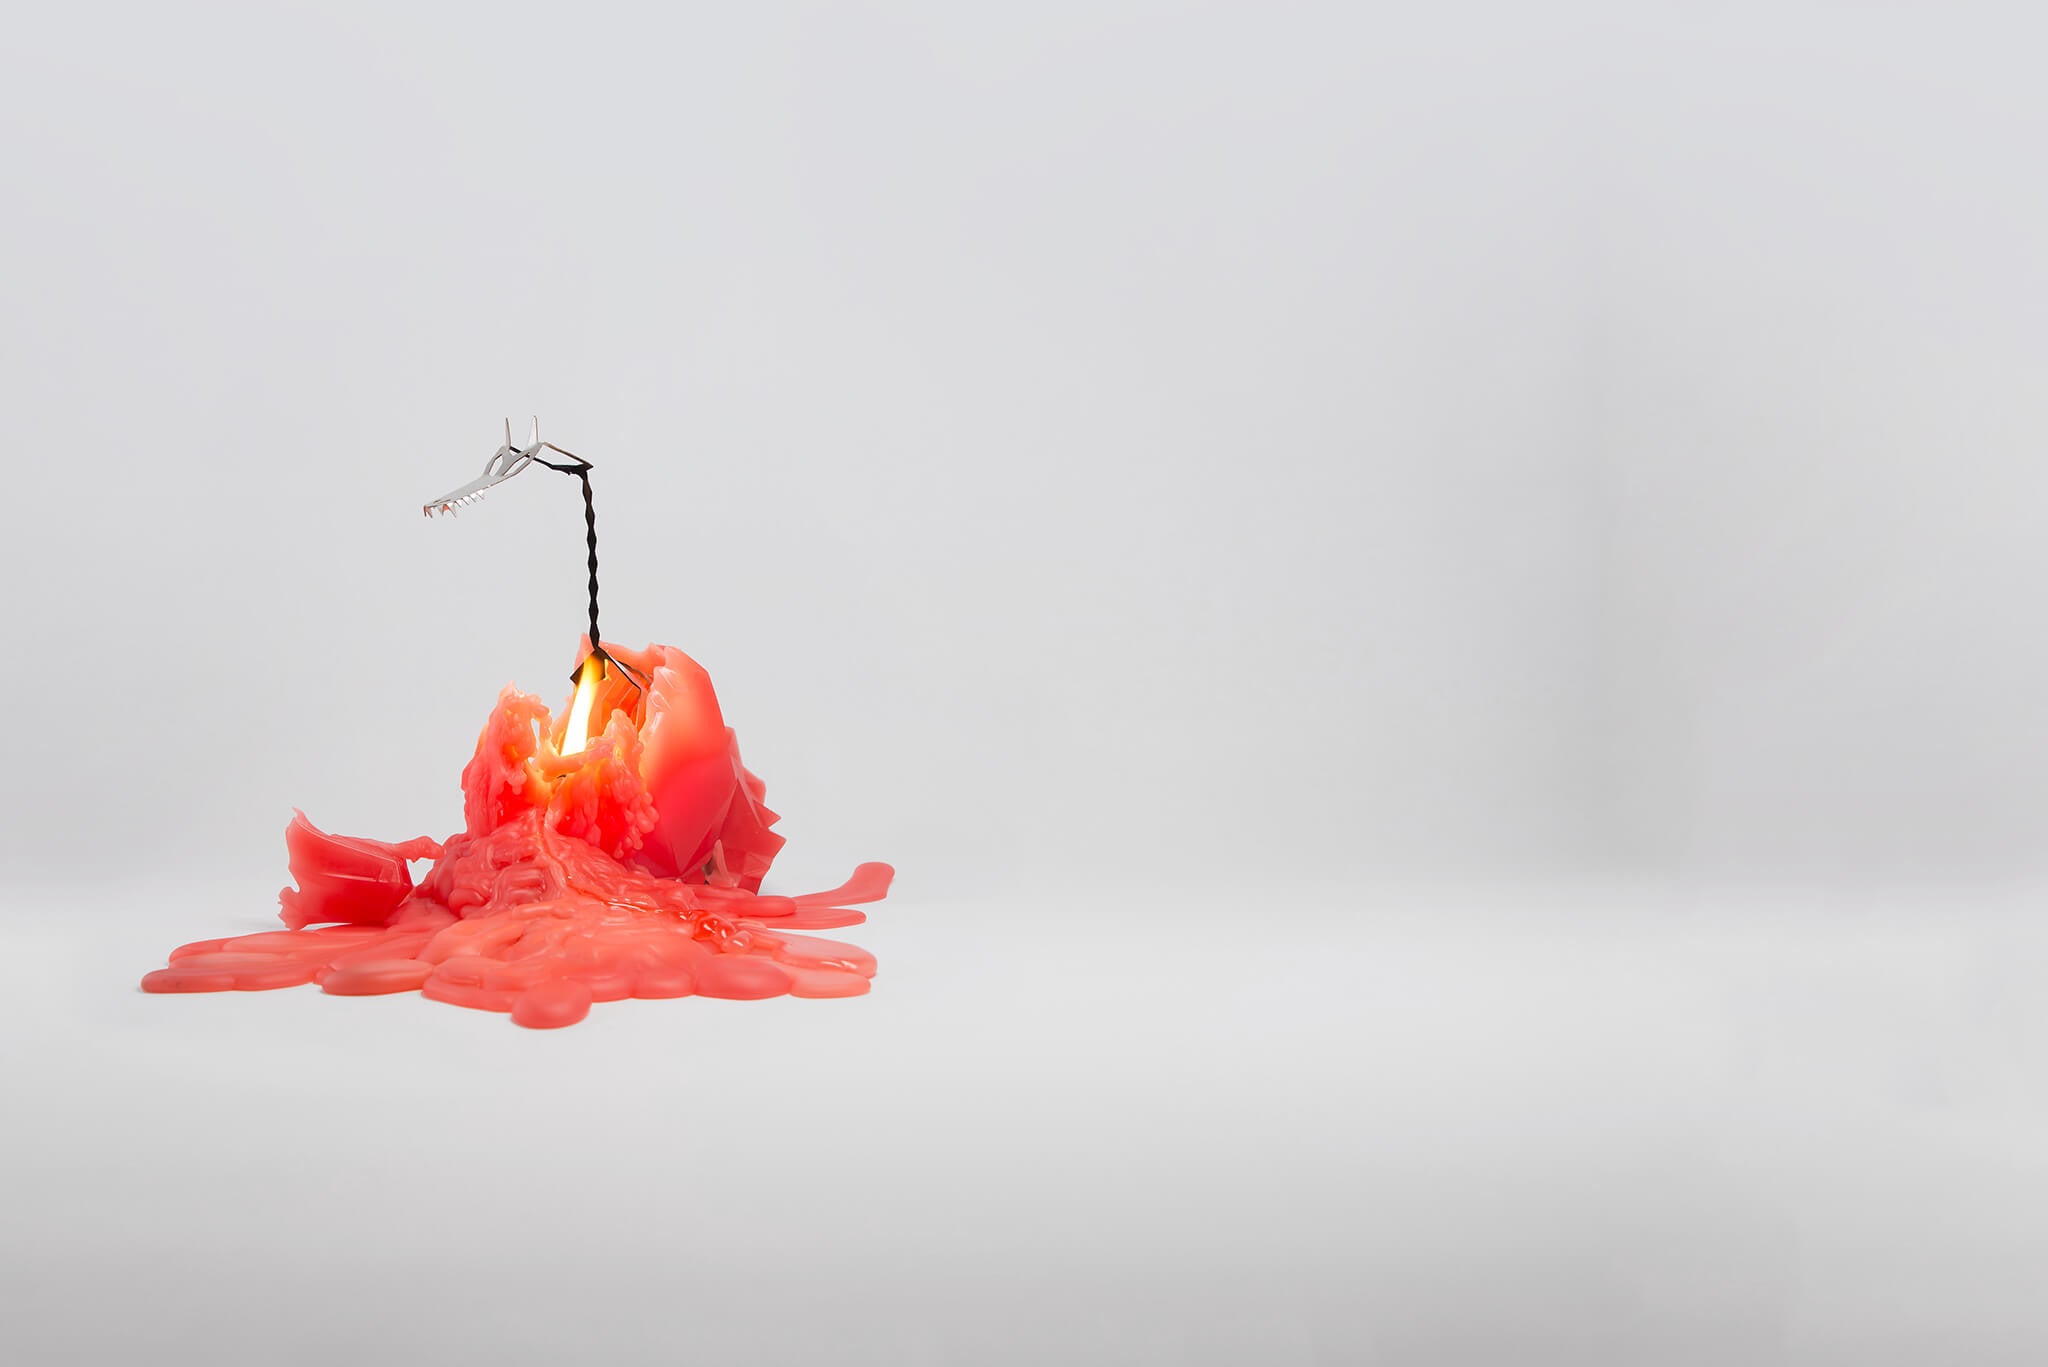 Red dragon shaped pyropet candle reveals a metal skeleton frame while it melts.